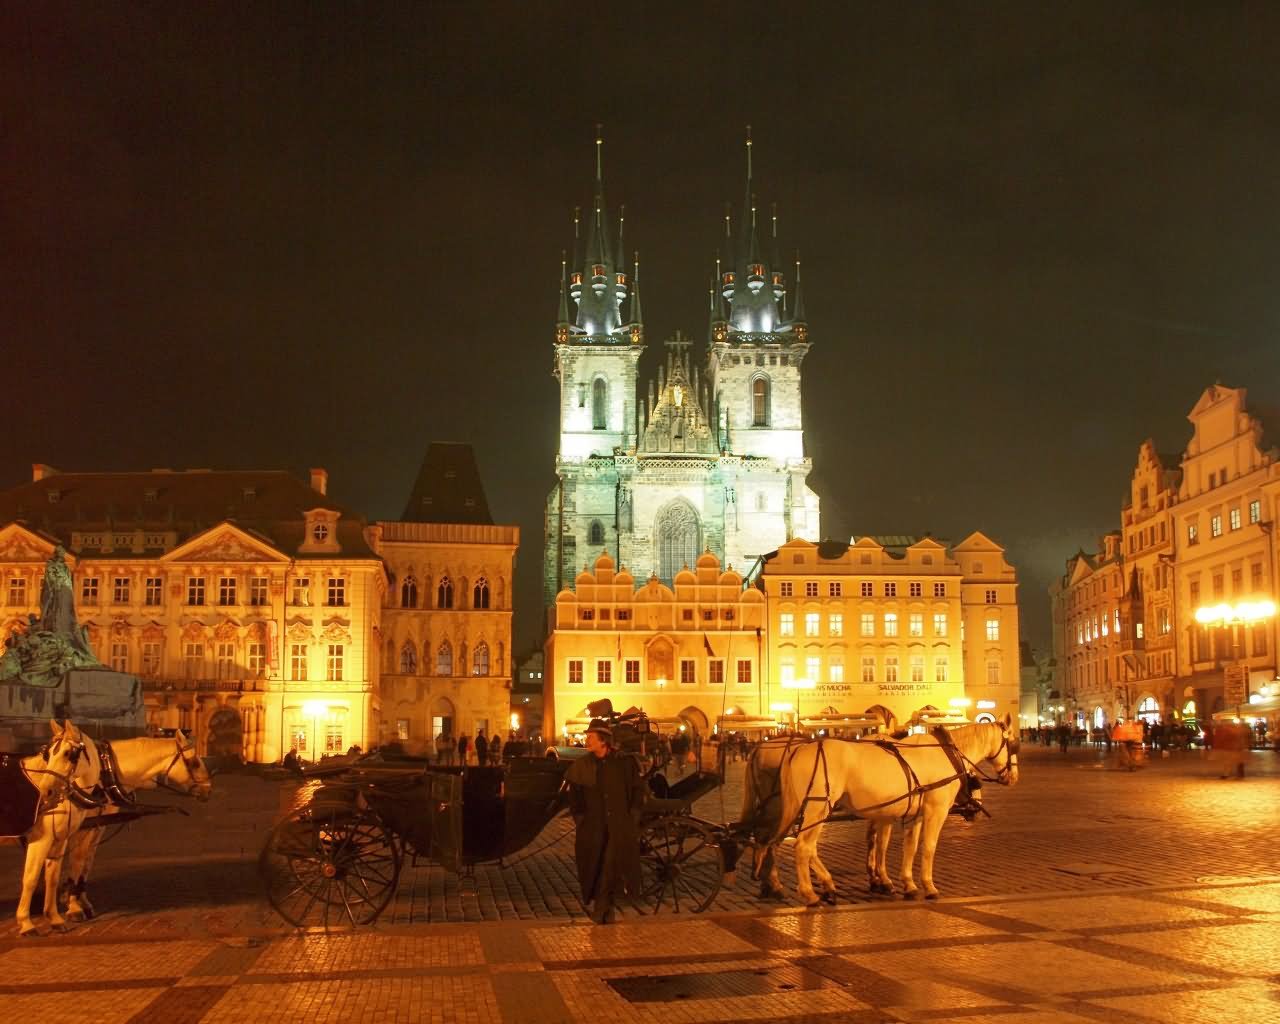 38 Most Incredible Old Town Square, Prague Night Pictures And Photos